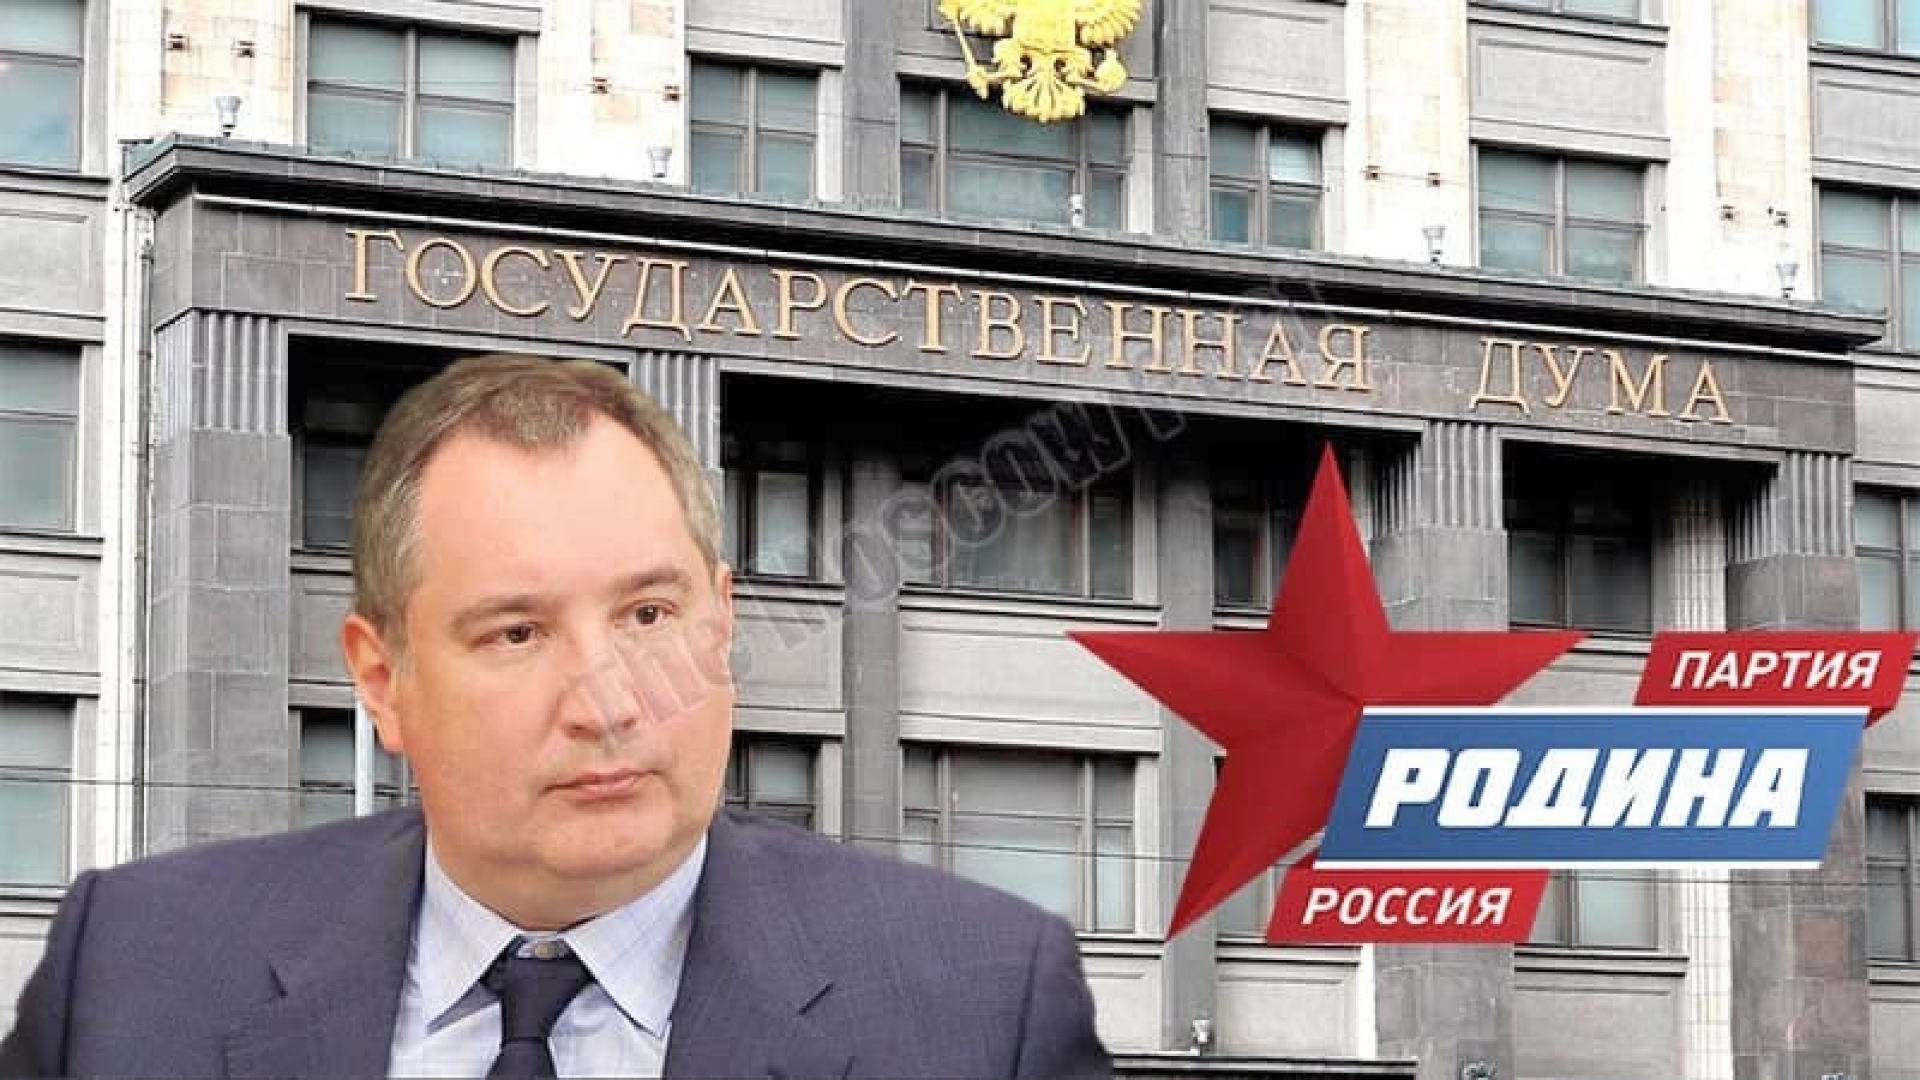 New political party for Rogozin?